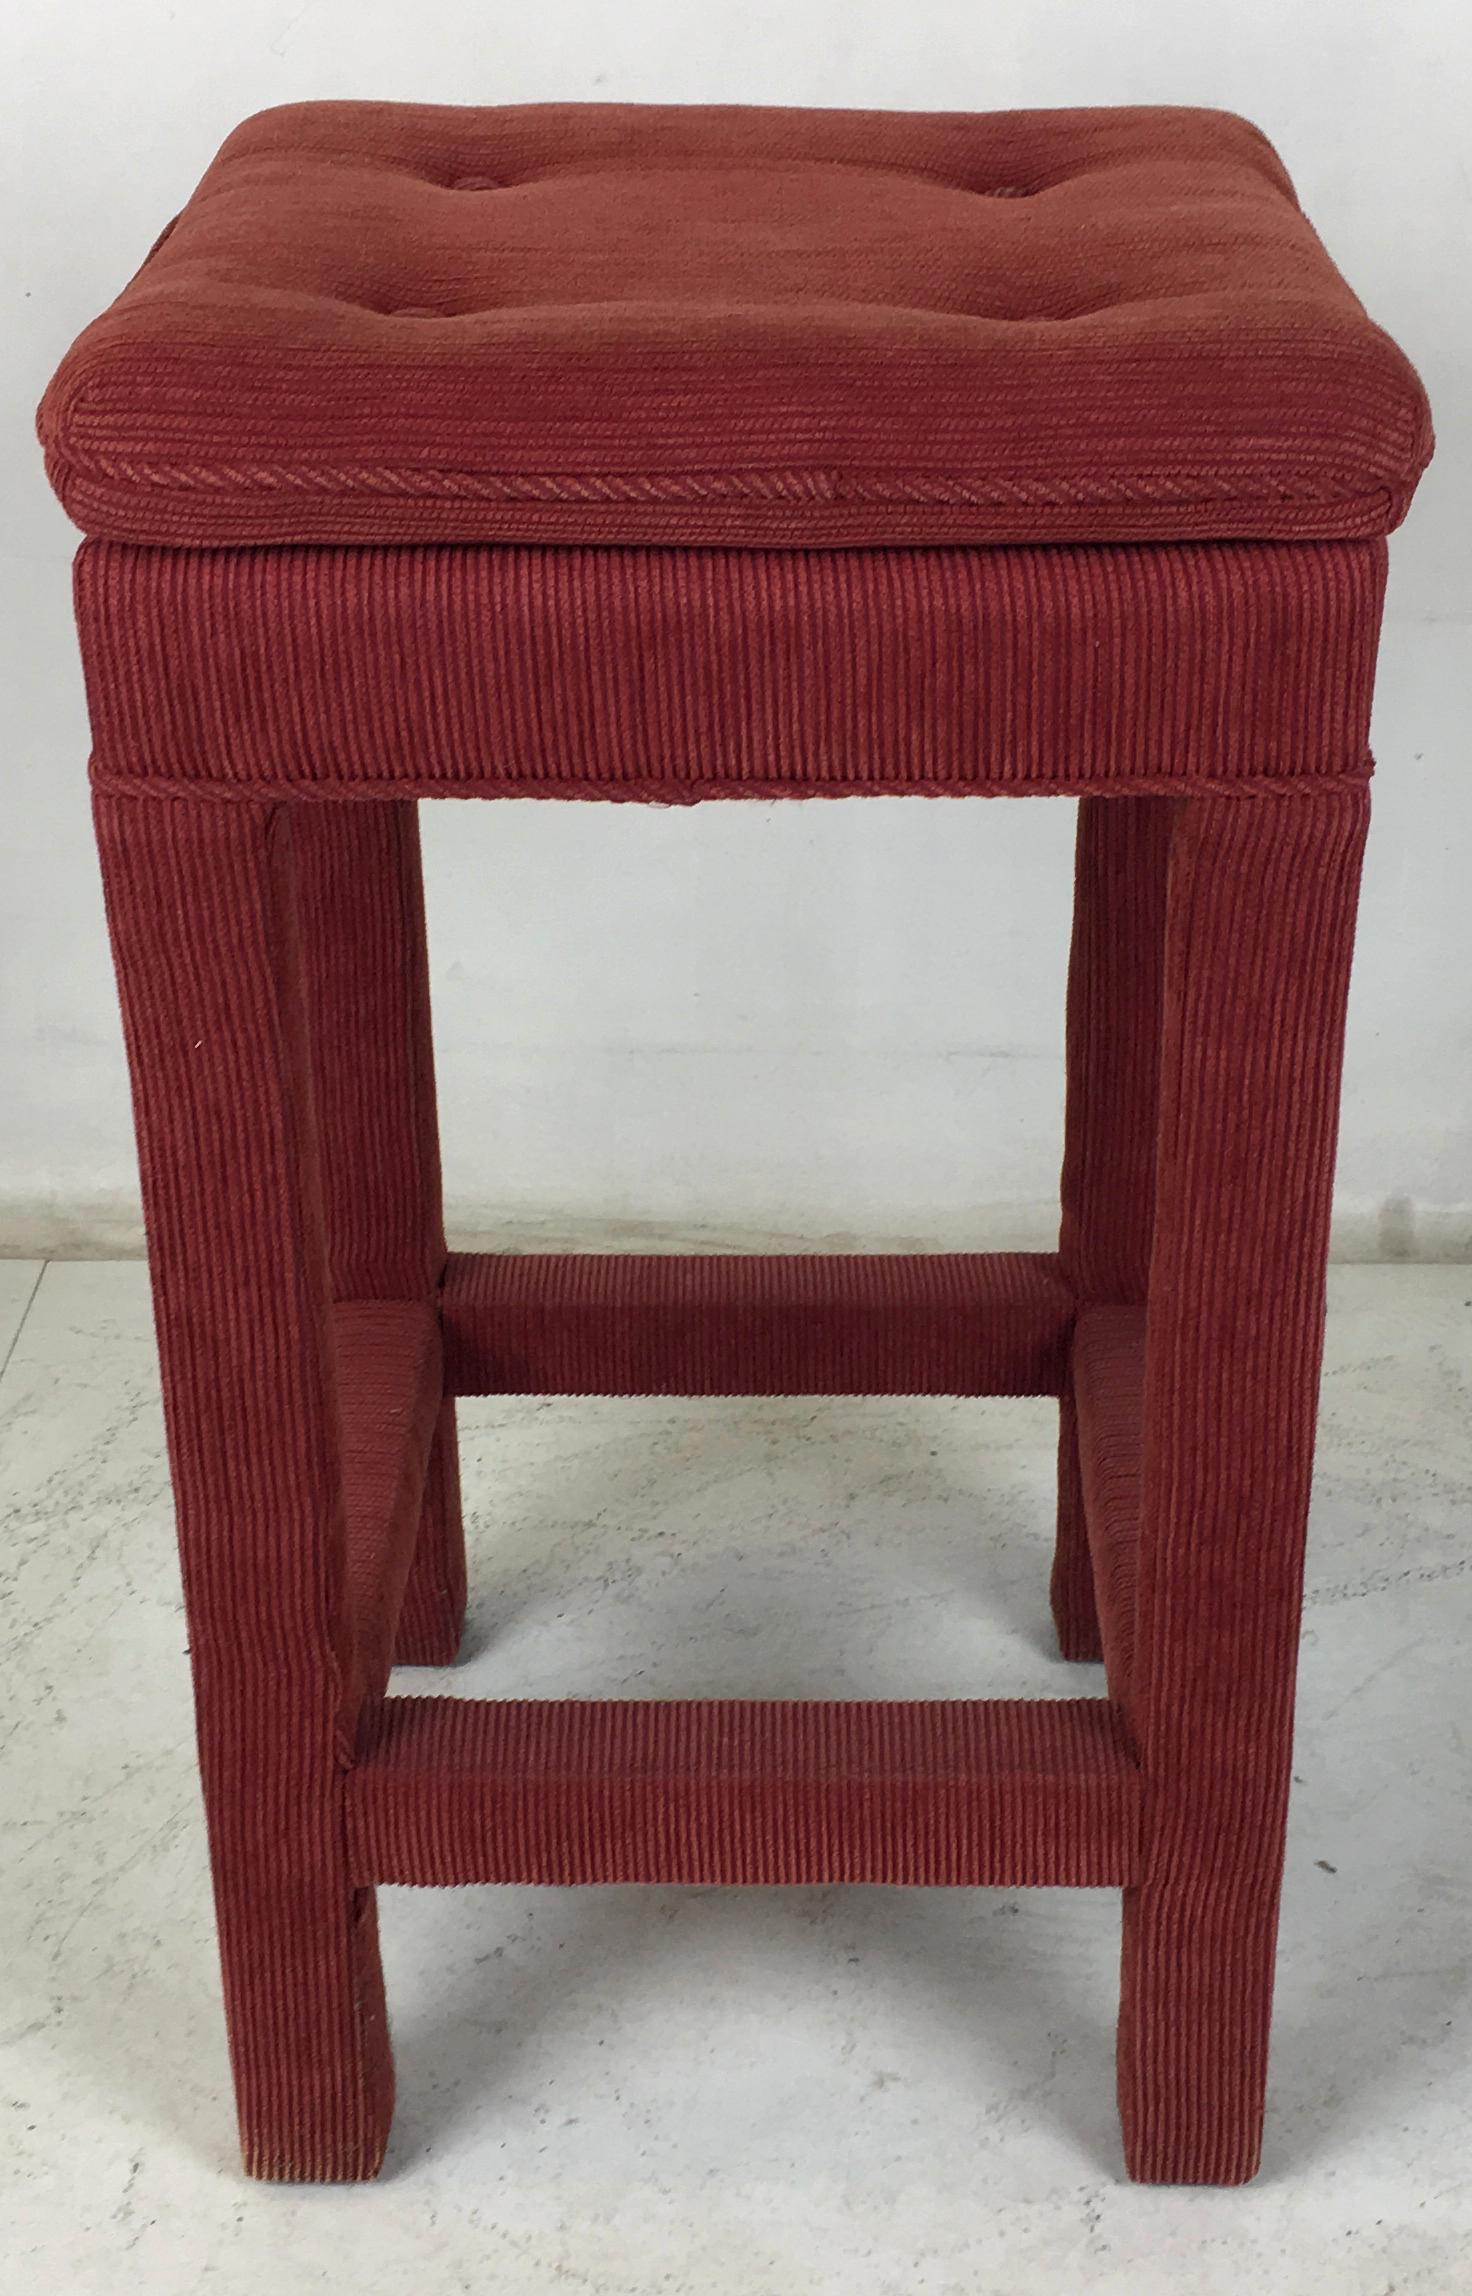 Four handsome classic Parsons style barstools in deep red ribbed cotton upholstery. The set have been reupholstered and can be used as-is if desired. The stretchers double as foot rests allowing the user to revolve to any side or corner. The seats